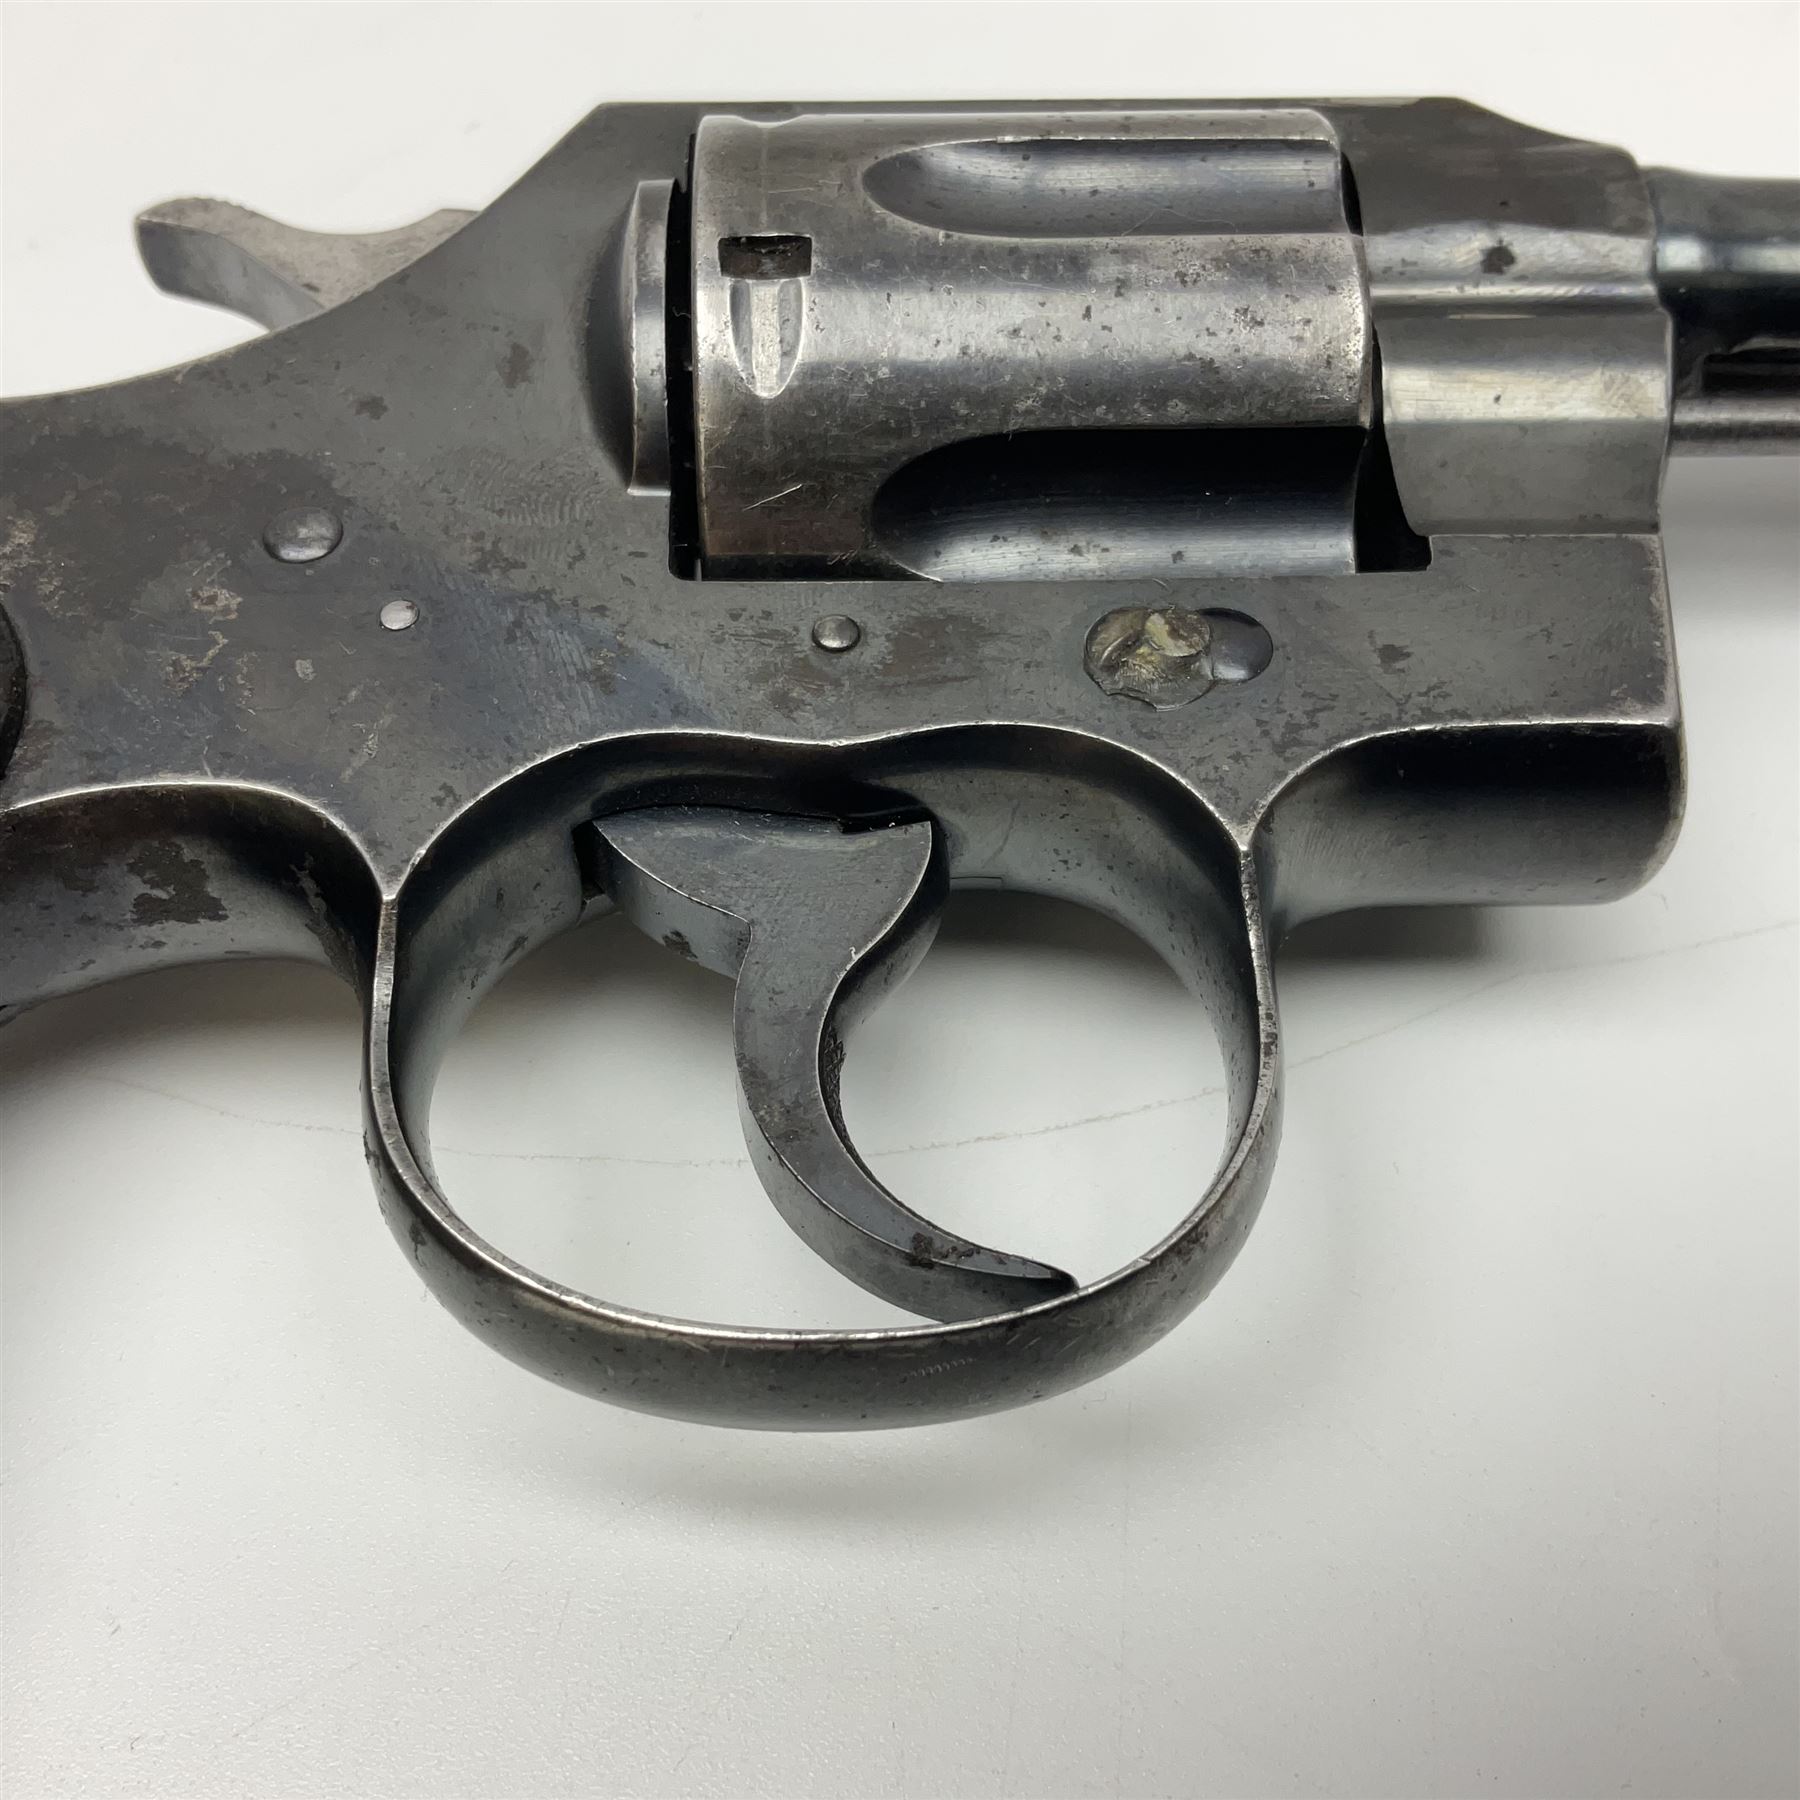 Deactivated Colt Official Police 38-200 six-shot revolver - Image 6 of 15